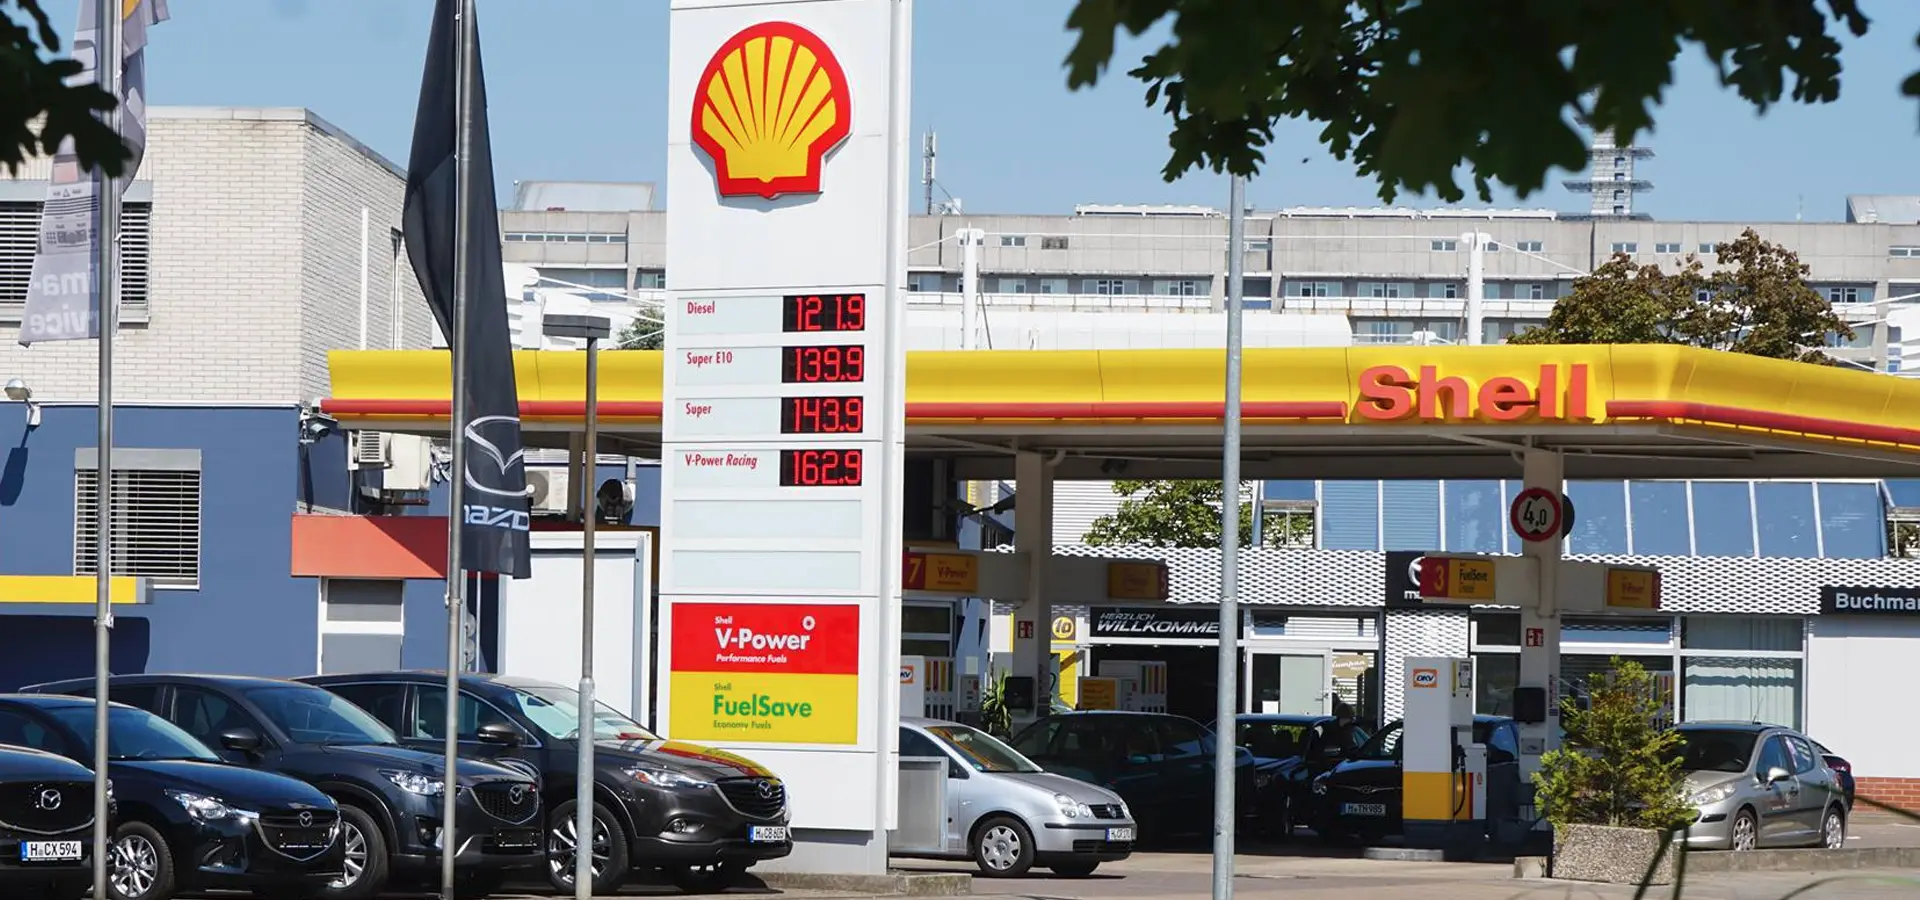 Shell Tankstelle bei Autohaus Buchmanns in Hannover.